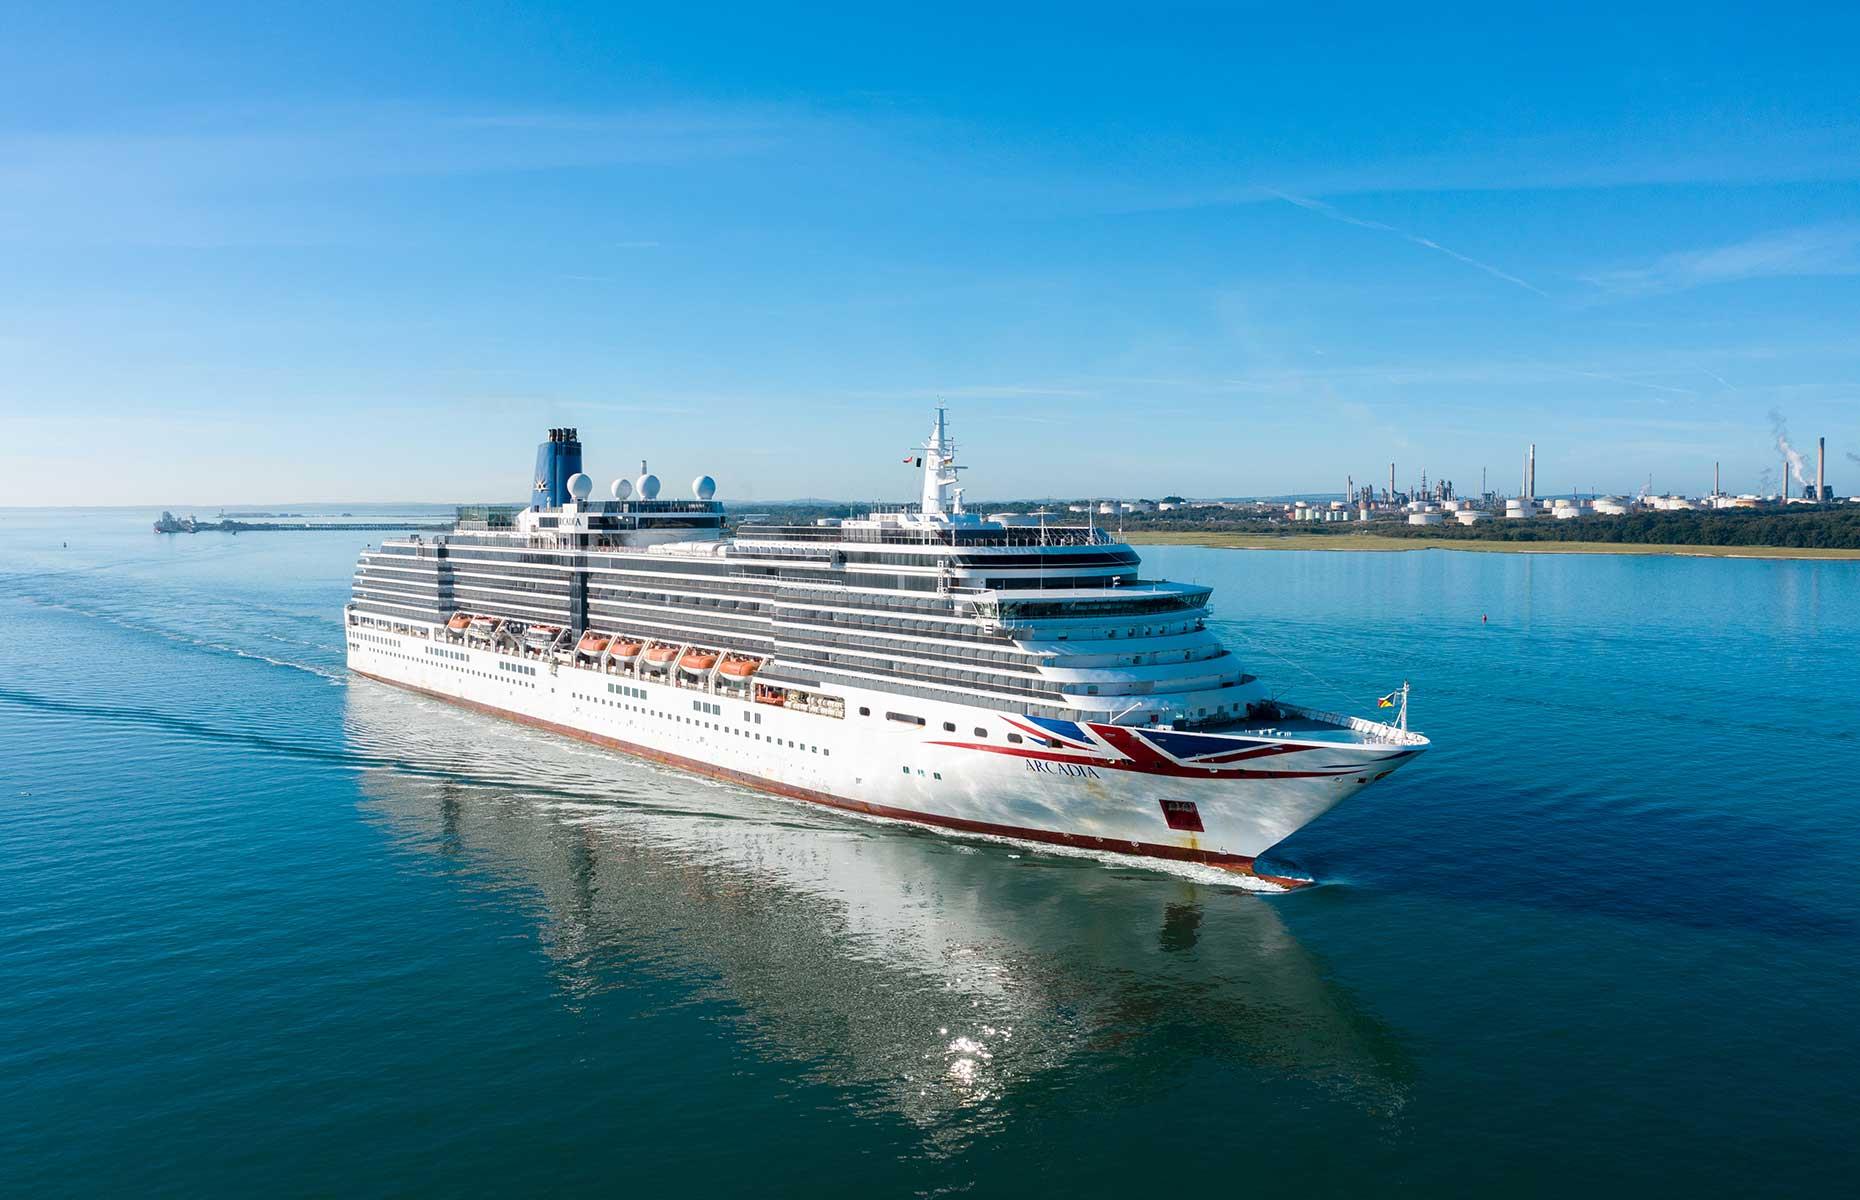 <p>The 2020s got off to an eventful start. The COVID-19 pandemic halted almost all cruises, with some passengers and crew marooned onboard while testing and entry protocols were debated. In 2021 rife cancellations, last-minute border changes and variant outbreaks persisted. However, 2022 has indicated a return to pre-pandemic popularity, with 300 cruise ships departing in April – pretty impressive compared to just 22 departing in April 2021. Cruise lines have incorporated more health and safety protocols, such as advising passengers to control their TV, light and temperature via an app instead of touchpoints. </p>  <p><strong><a href="https://www.loveexploring.com/gallerylist/81720/from-mayflower-to-titanic-the-worlds-most-historic-ships-you-can-visit">If this has floated your boat, here's where to see the world's most famous ships</a></strong></p>